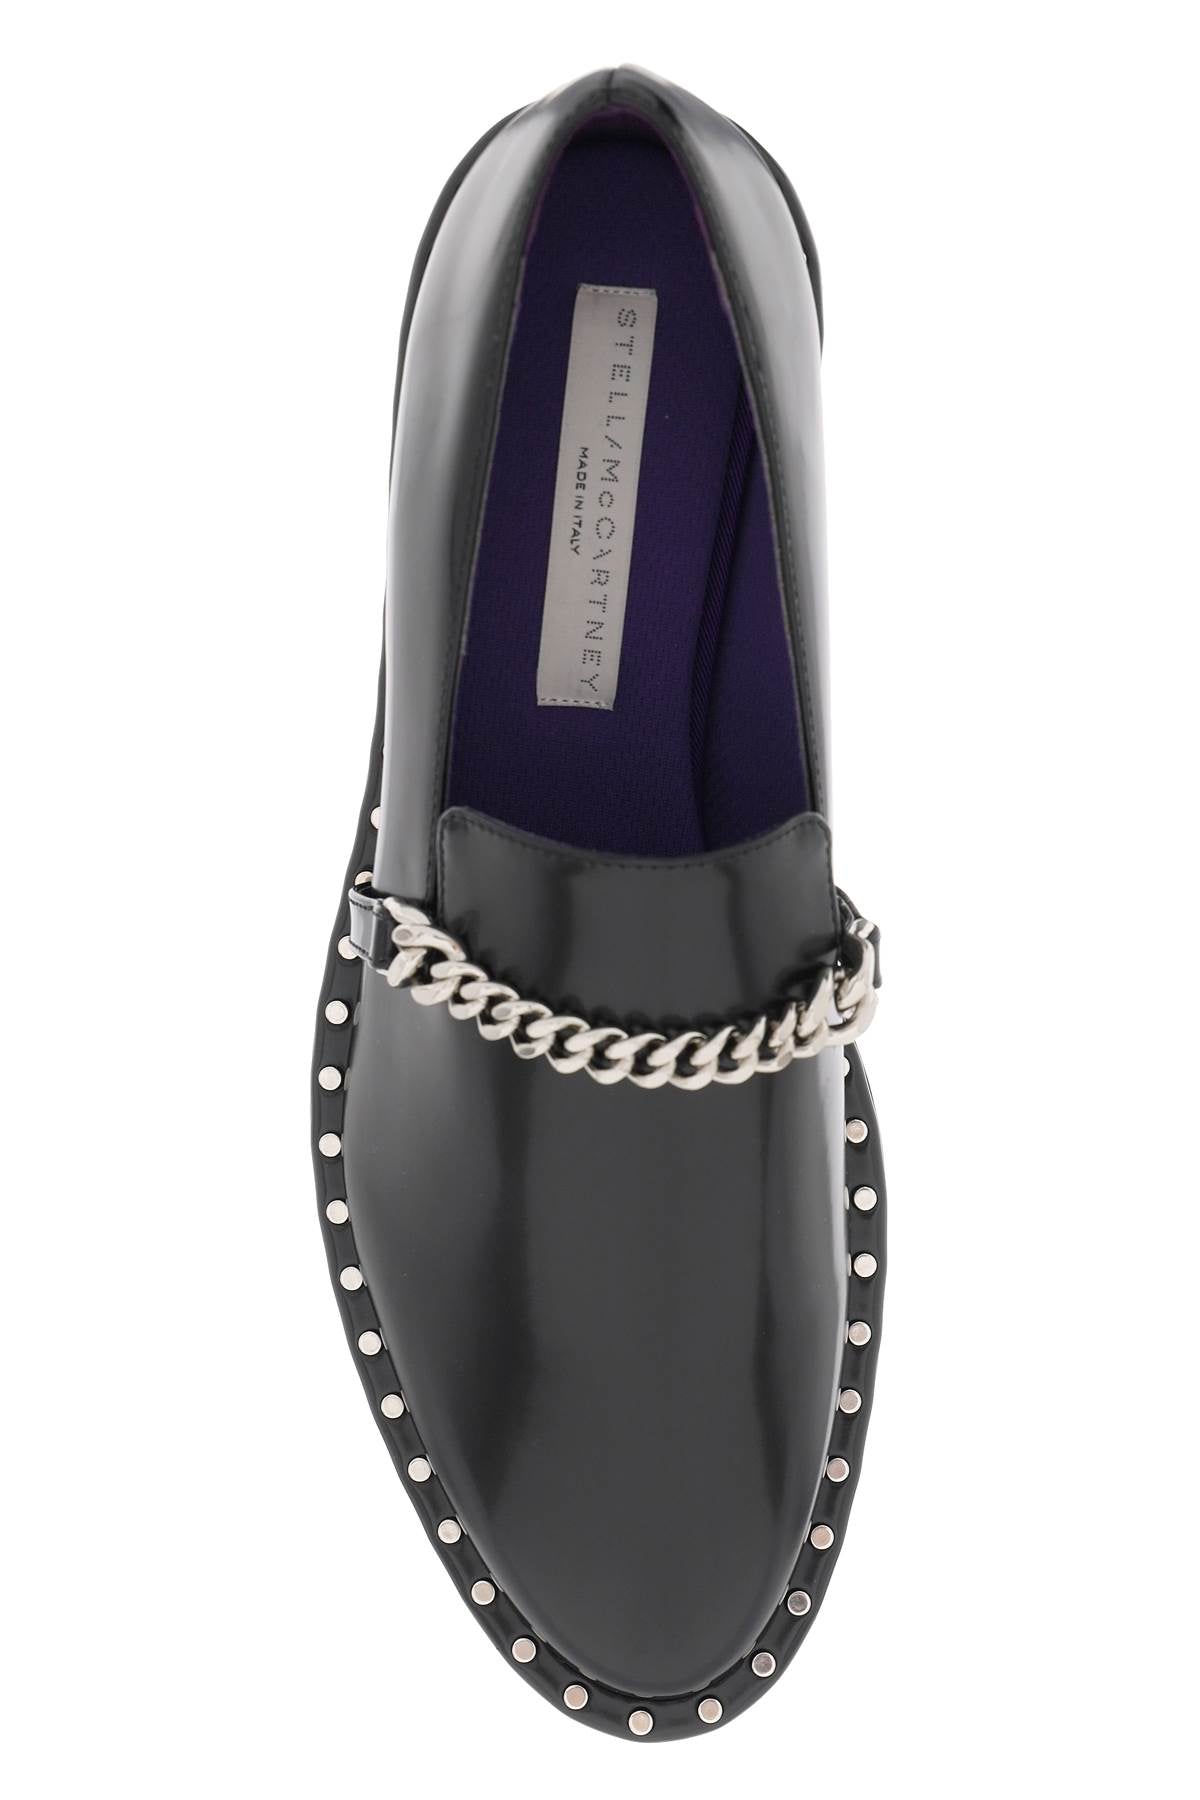 STELLA MCCARTNEY Stylish and Sustainable Falabella Loafers for Women